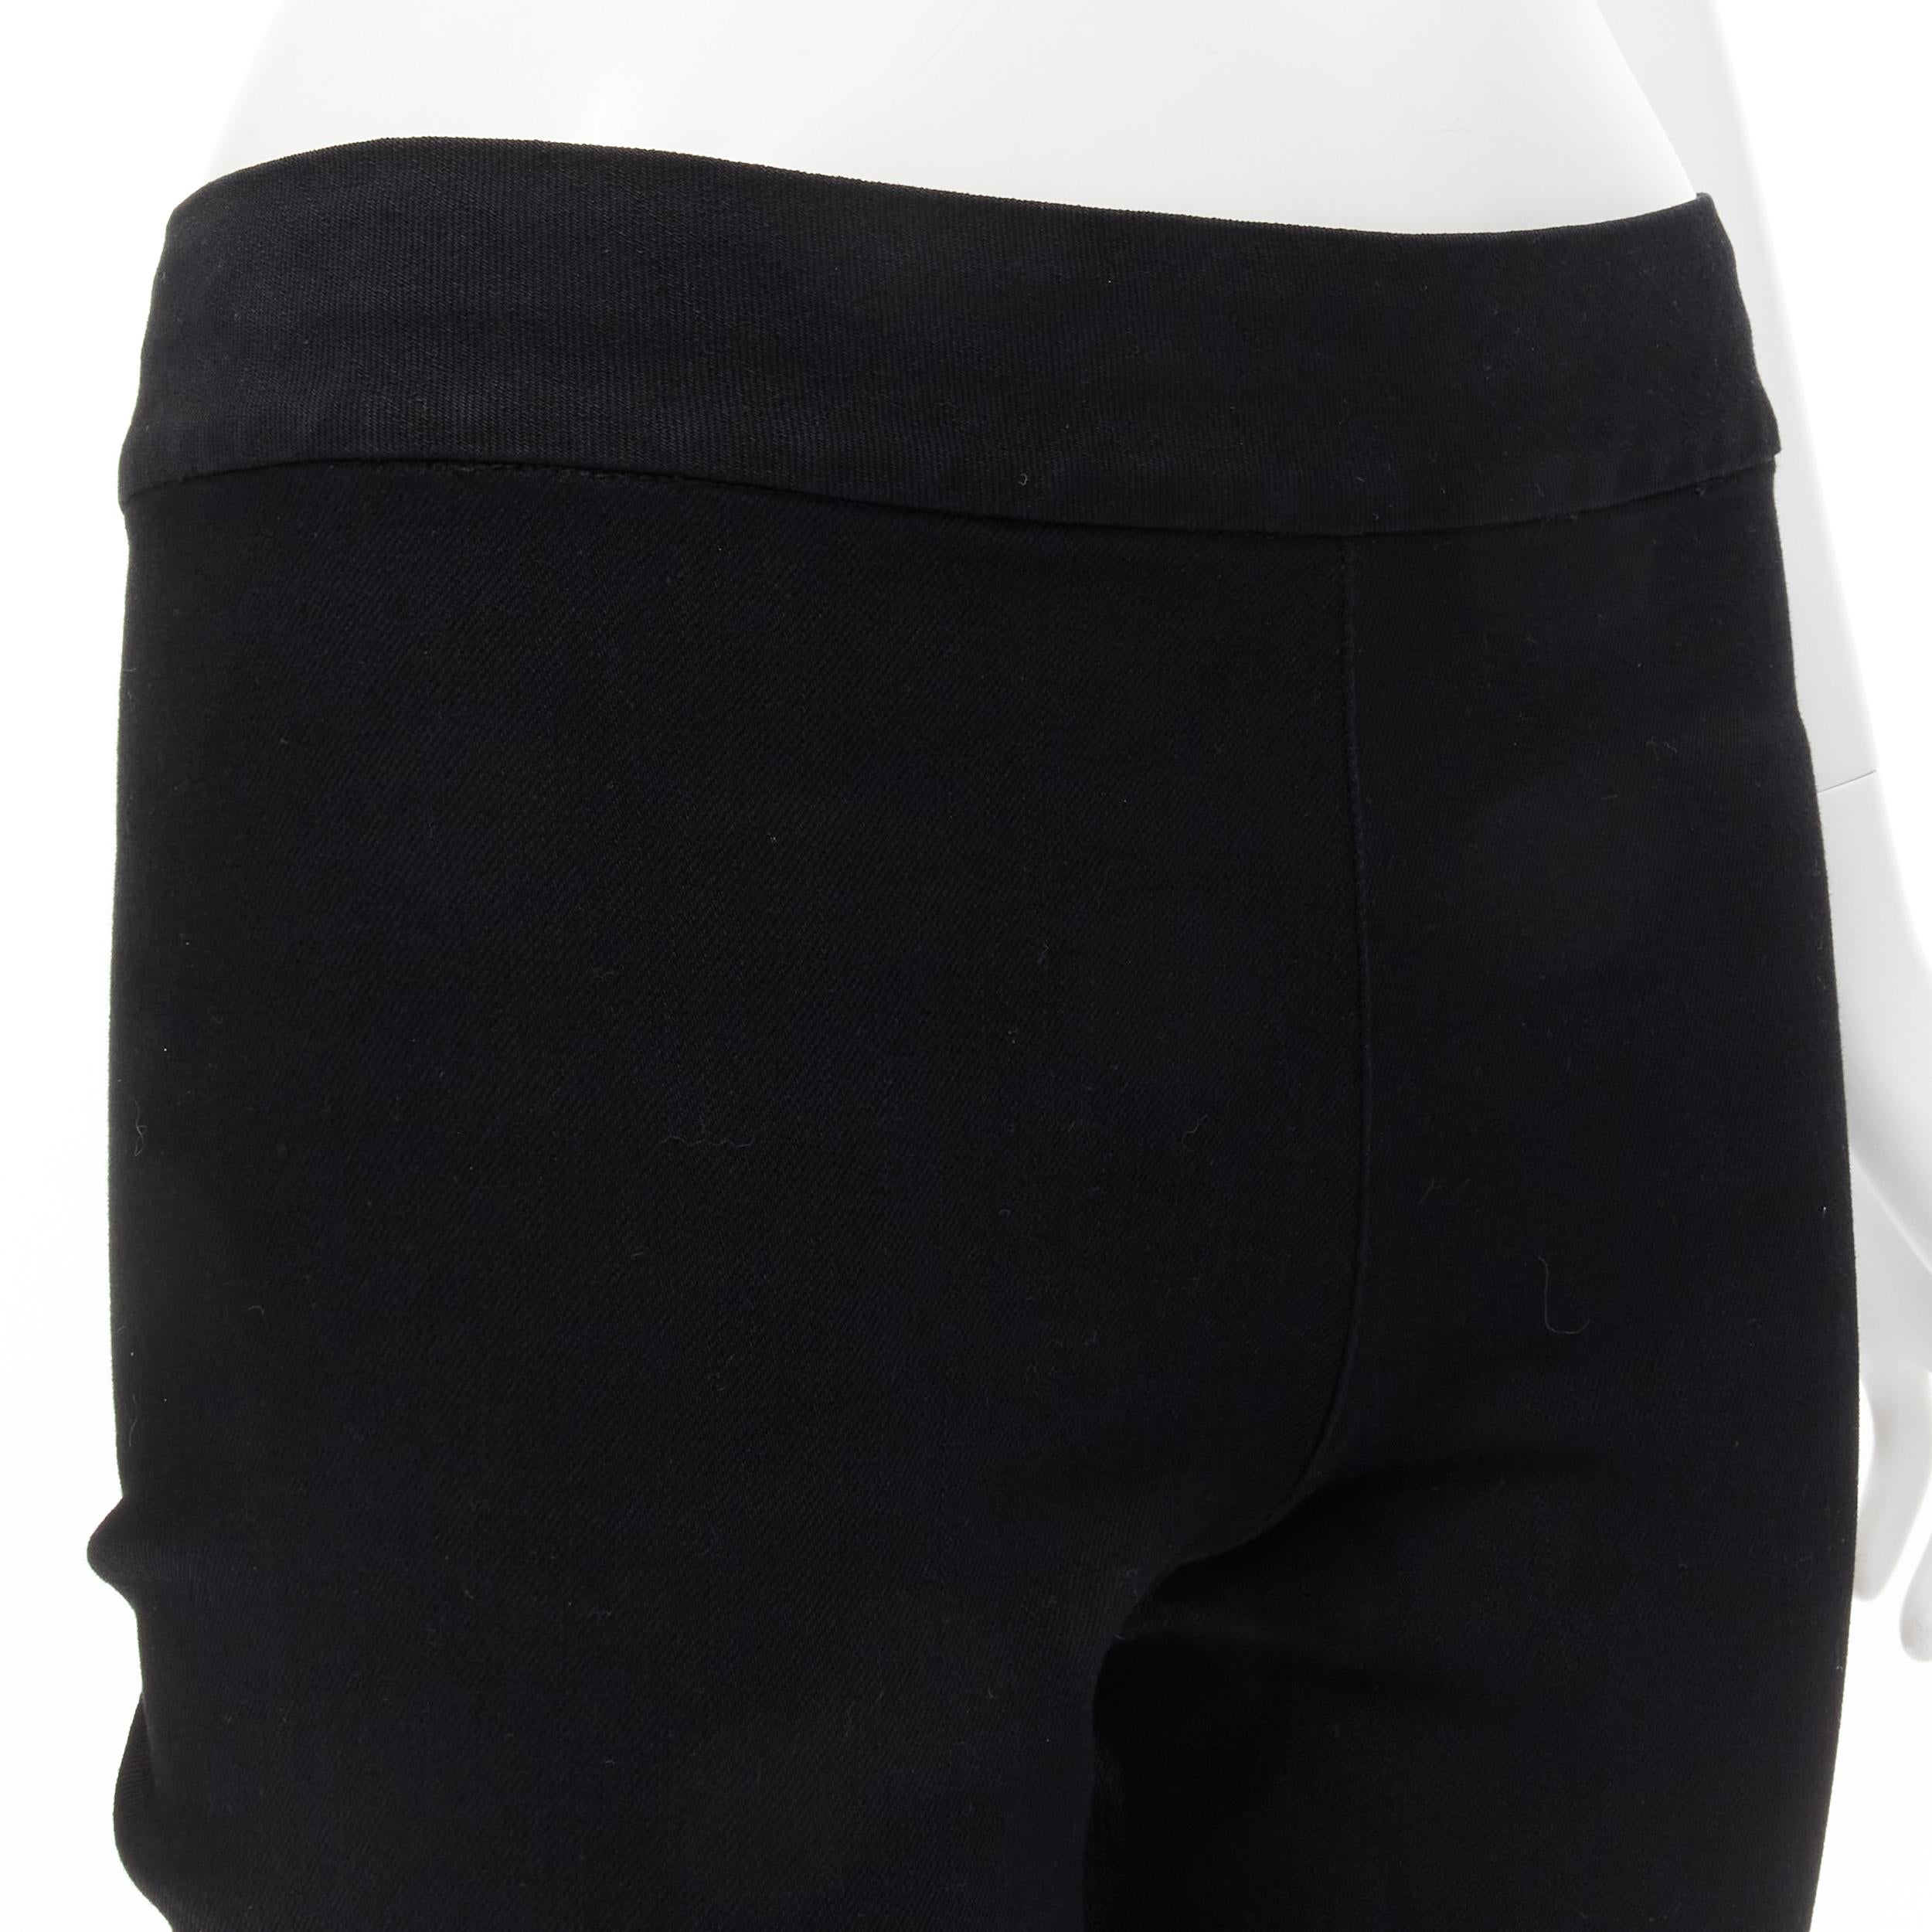 THE ROW black soft cotton stretch fit minimal legging pants S 
Reference: MELK/A00085 
Brand: The Row 
Material: Cotton 
Color: Black 
Pattern: Solid 
Extra Detail: Stretch fit. 
Made in: USA 

CONDITION: 
Condition: Excellent, this item was